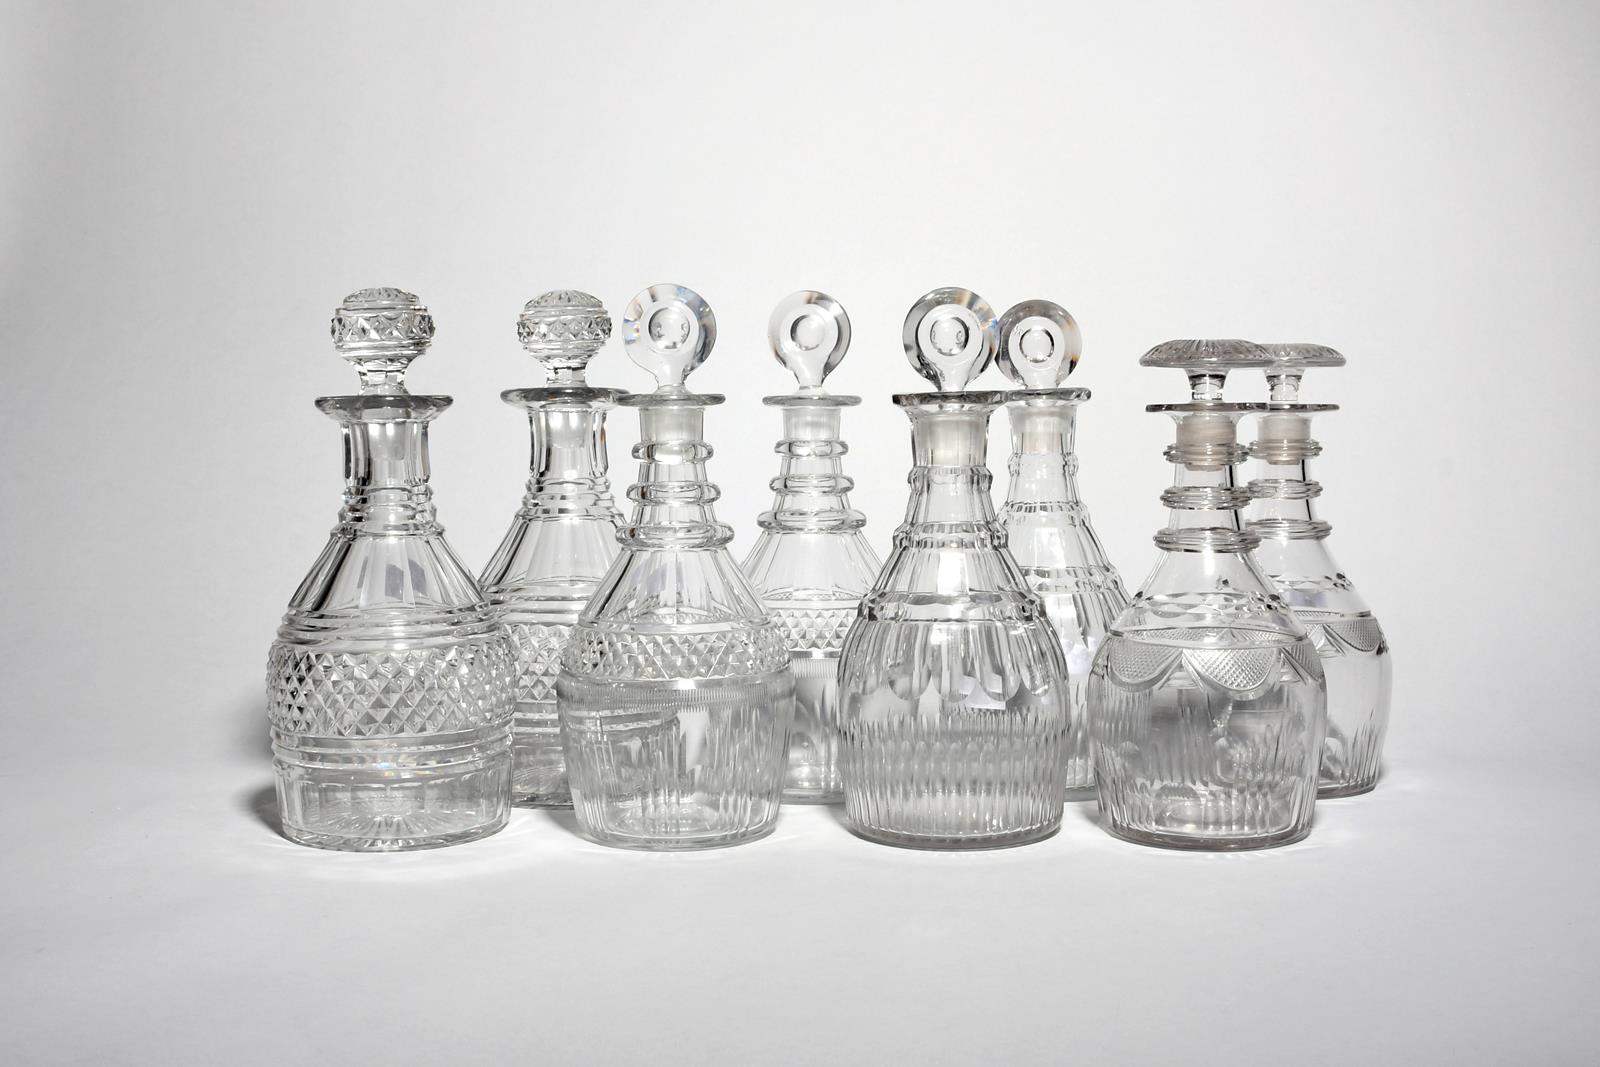 Four pairs of good cut glass decanters and stoppers c.1800 and later, one pair of Penrose